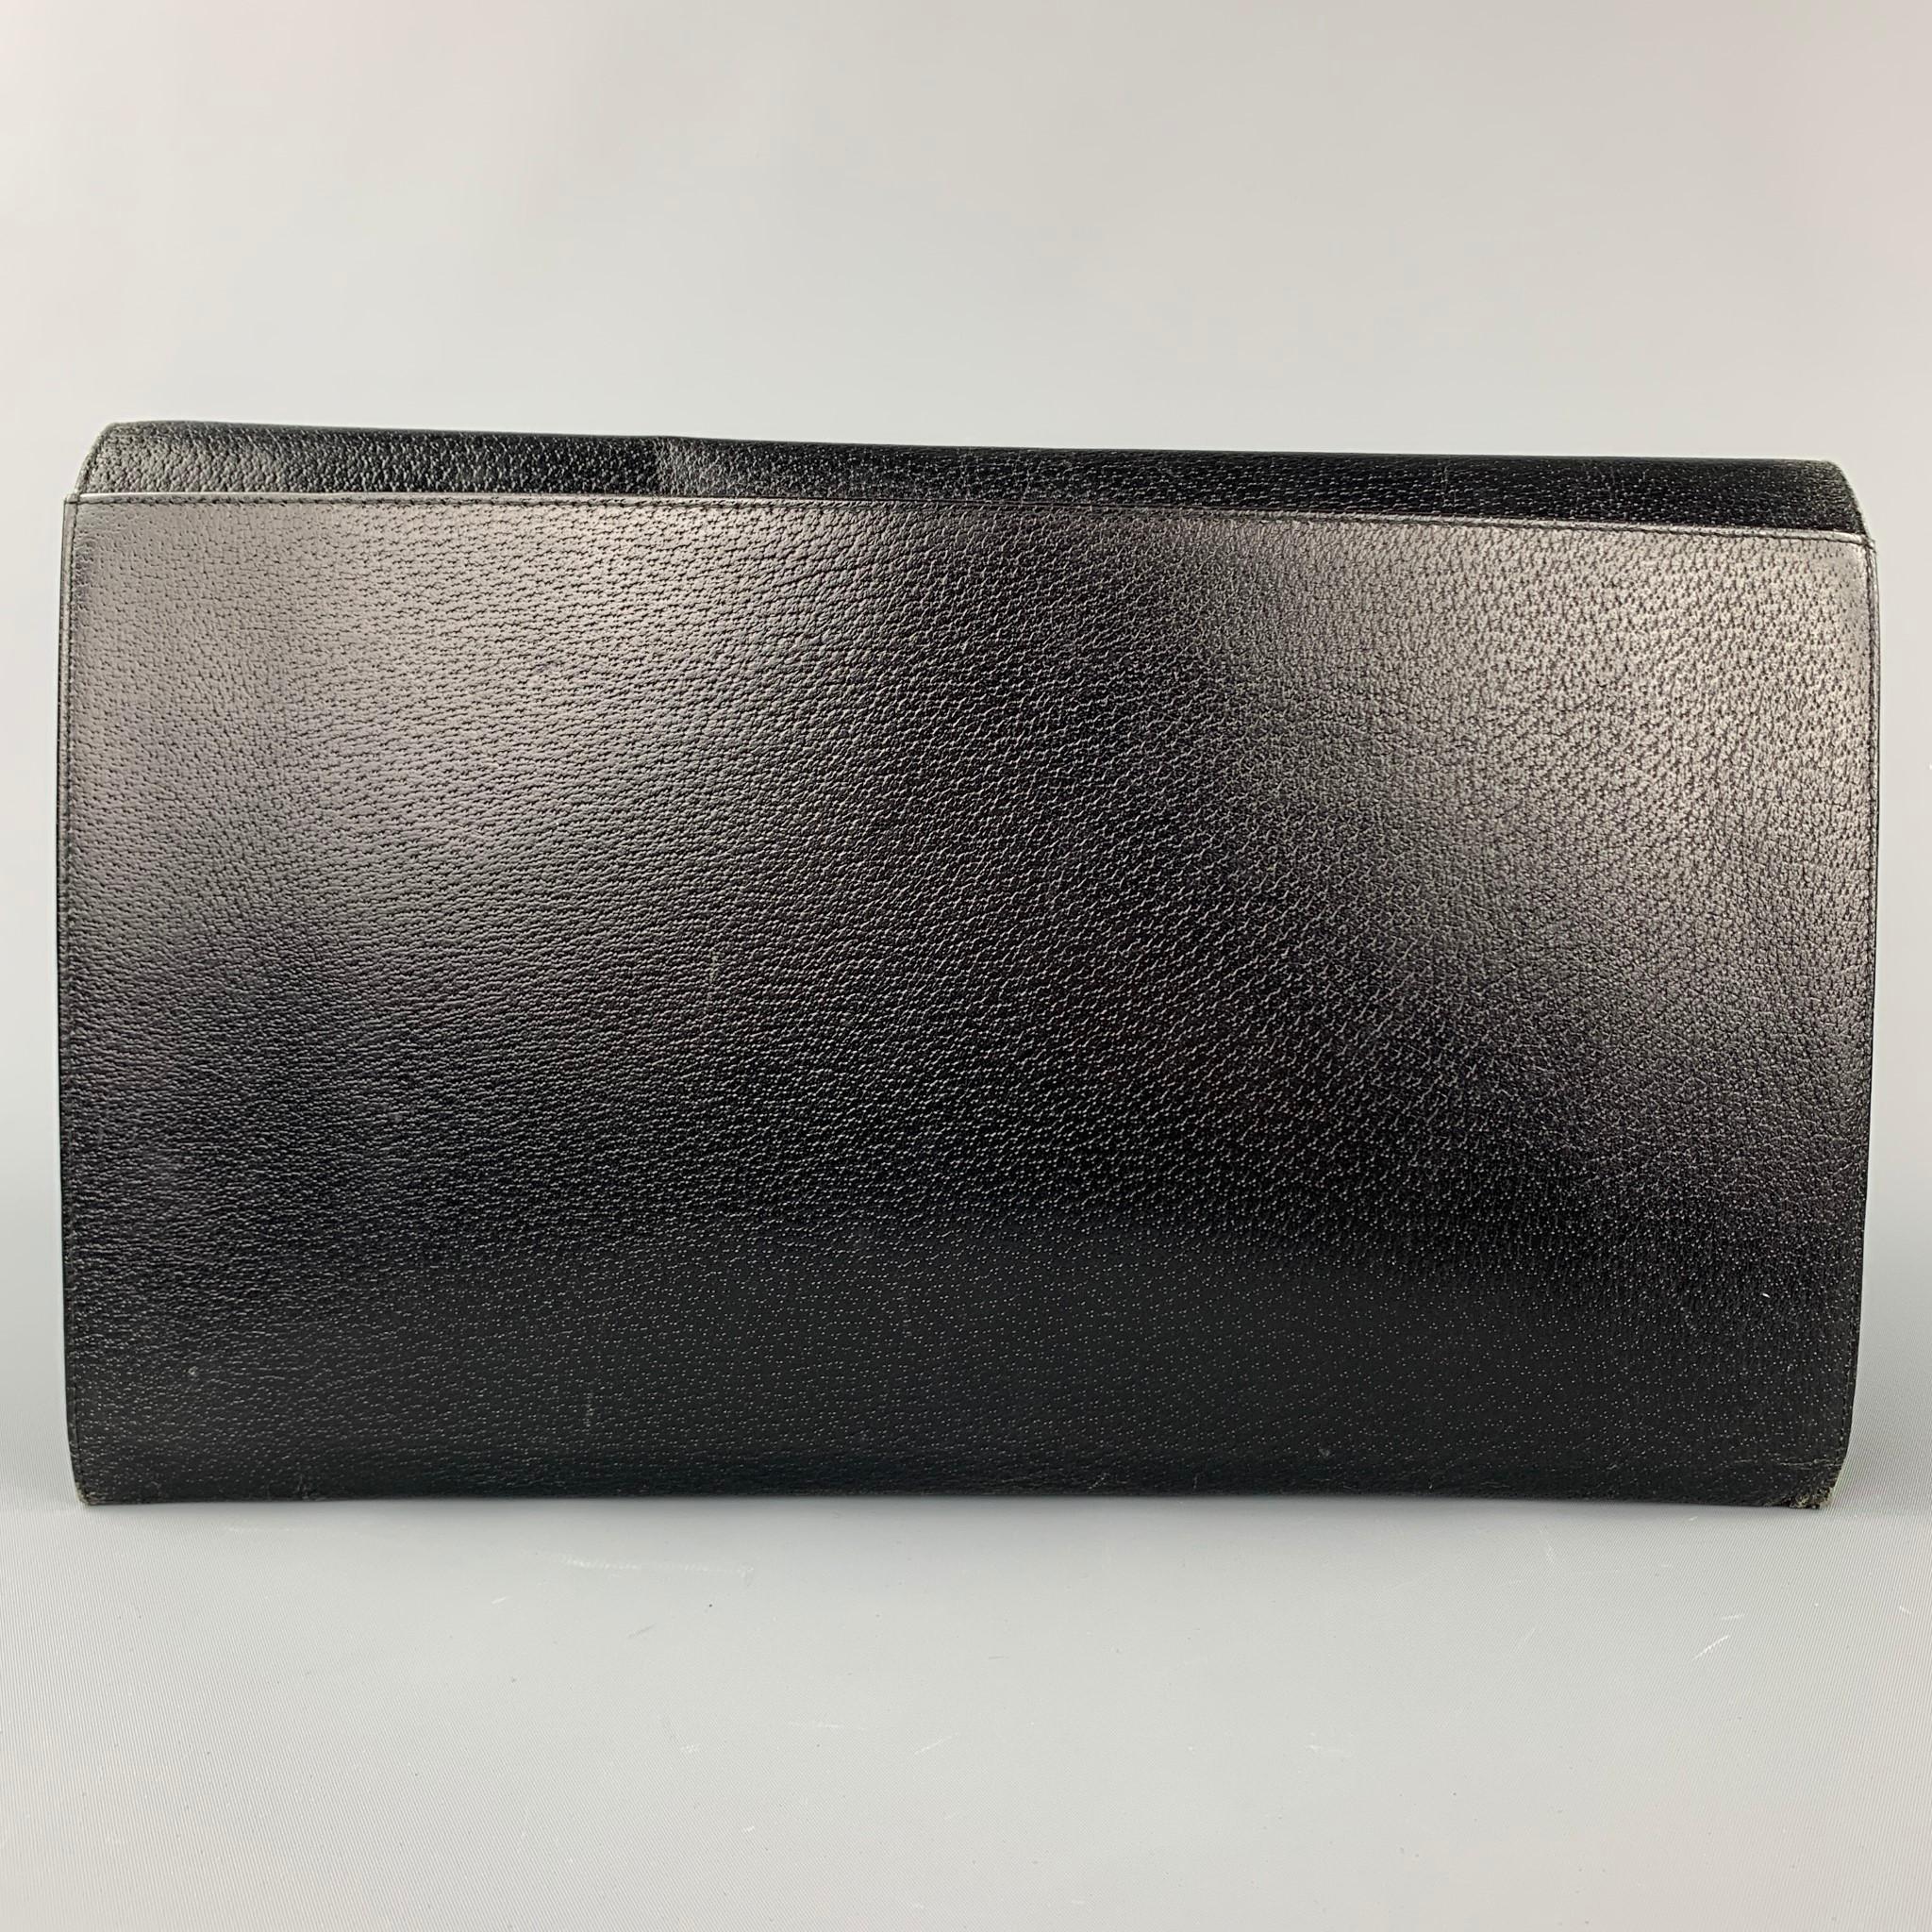 RALPH LAUREN briefcase comes in a black pigskin leather featuring inner dividers, zipper pocket, and a front lock closure. Made in Italy. 

Very Good Pre-Owned Condition.

Measurements:

Length: 15.5 in.
Height: 10 in.